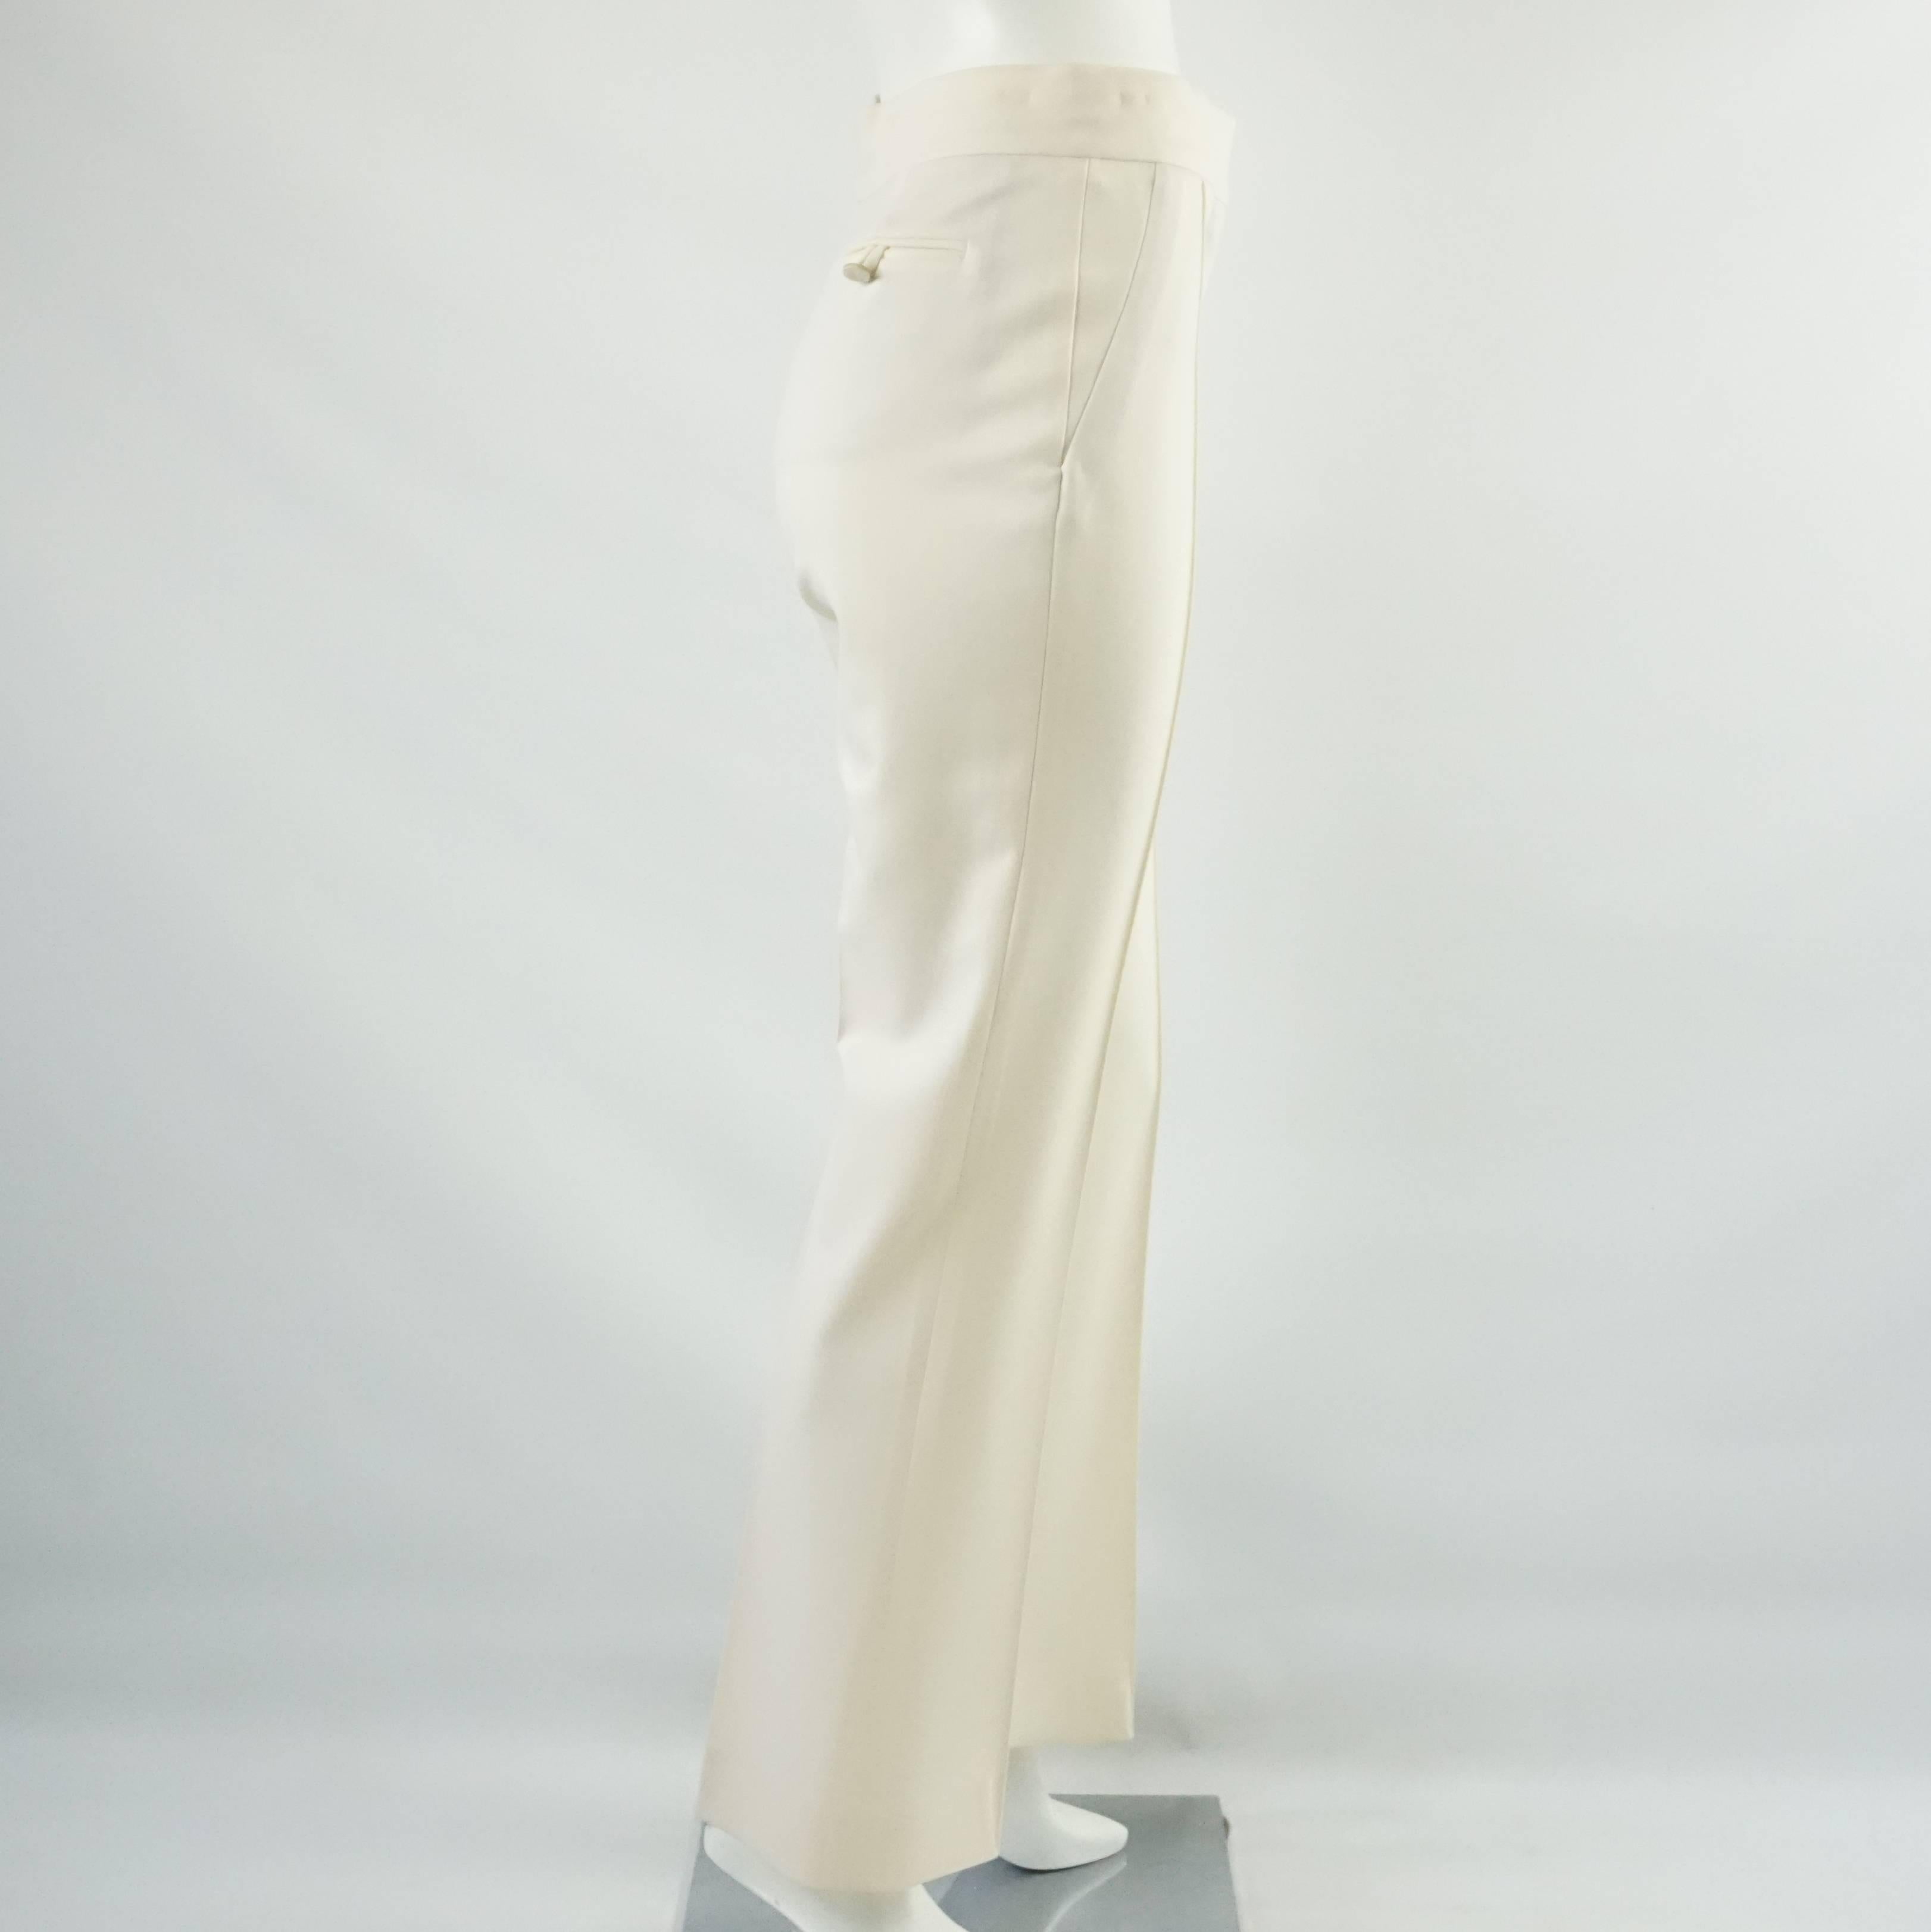 Valentino Ivory Wool Wide Leg Pants - 4. These beautiful Valentino pants are ivory wool. They feature a wide leg and a pleat down the front of each leg. These pants are in good condition with some staining. Size 4.

Measurements
Waist: 28